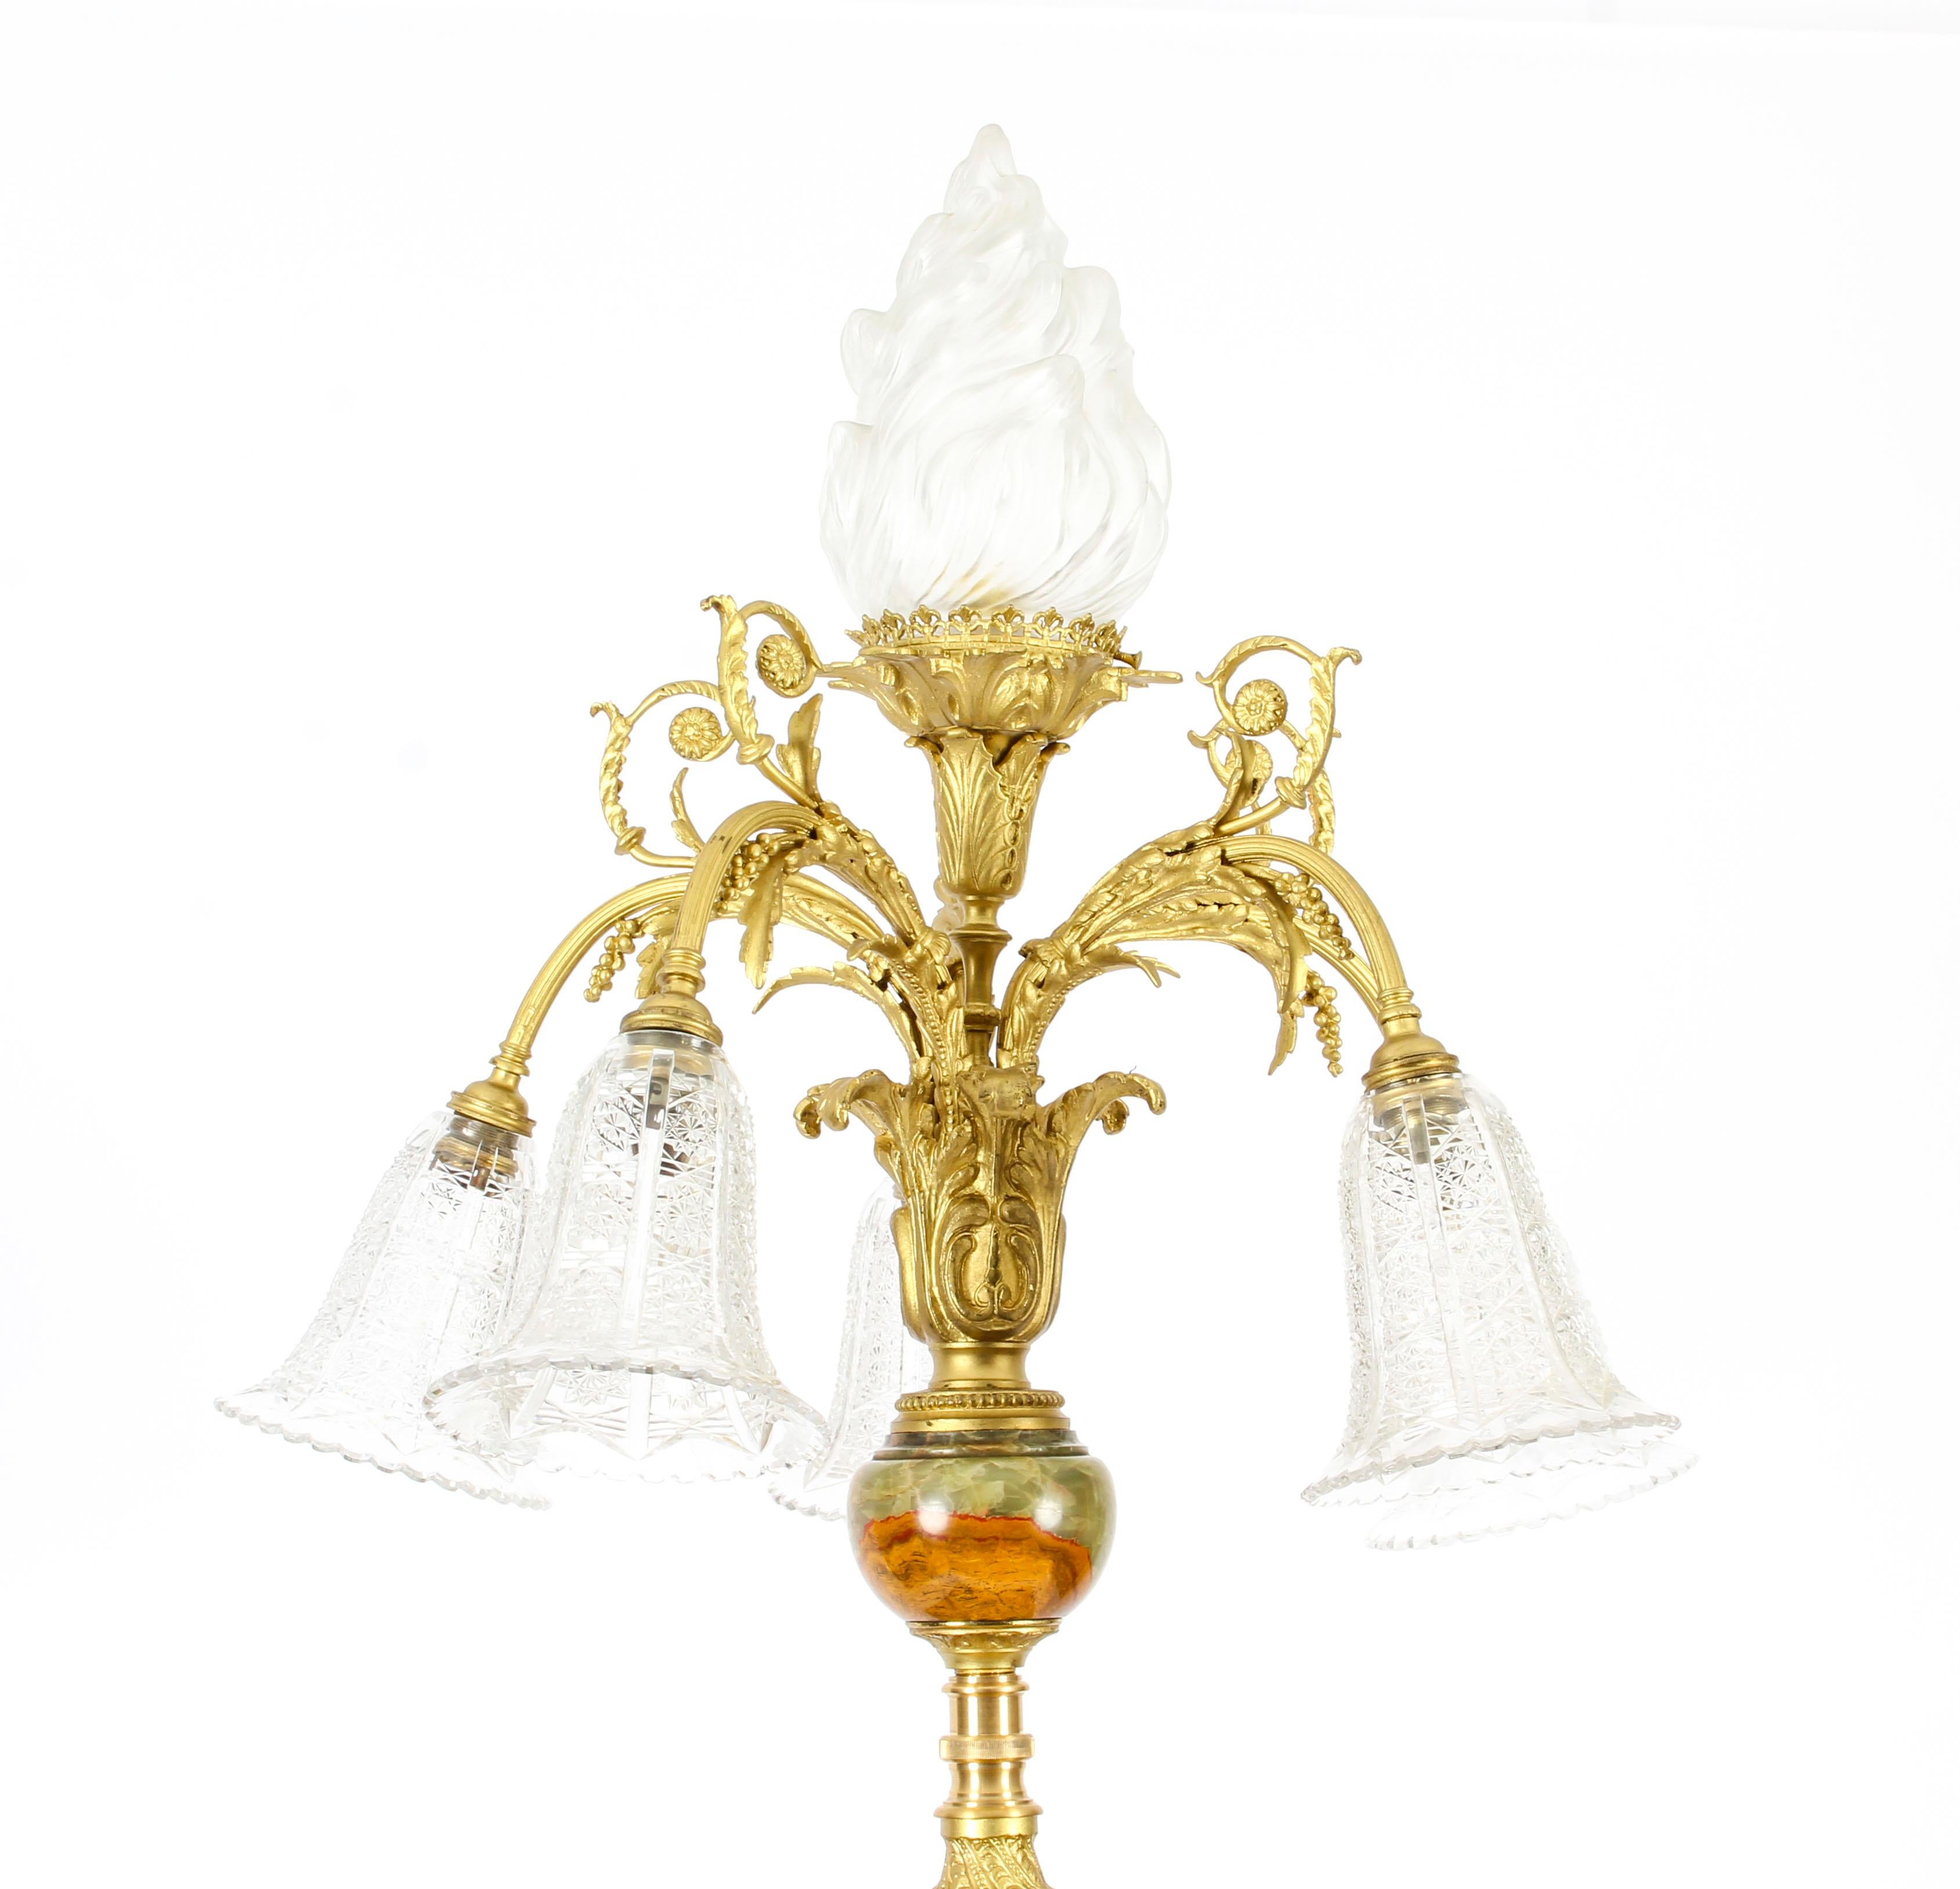 Antique Onyx and Ormolu Floor Standard Lamp Louis Revival, Early 20th Century 3